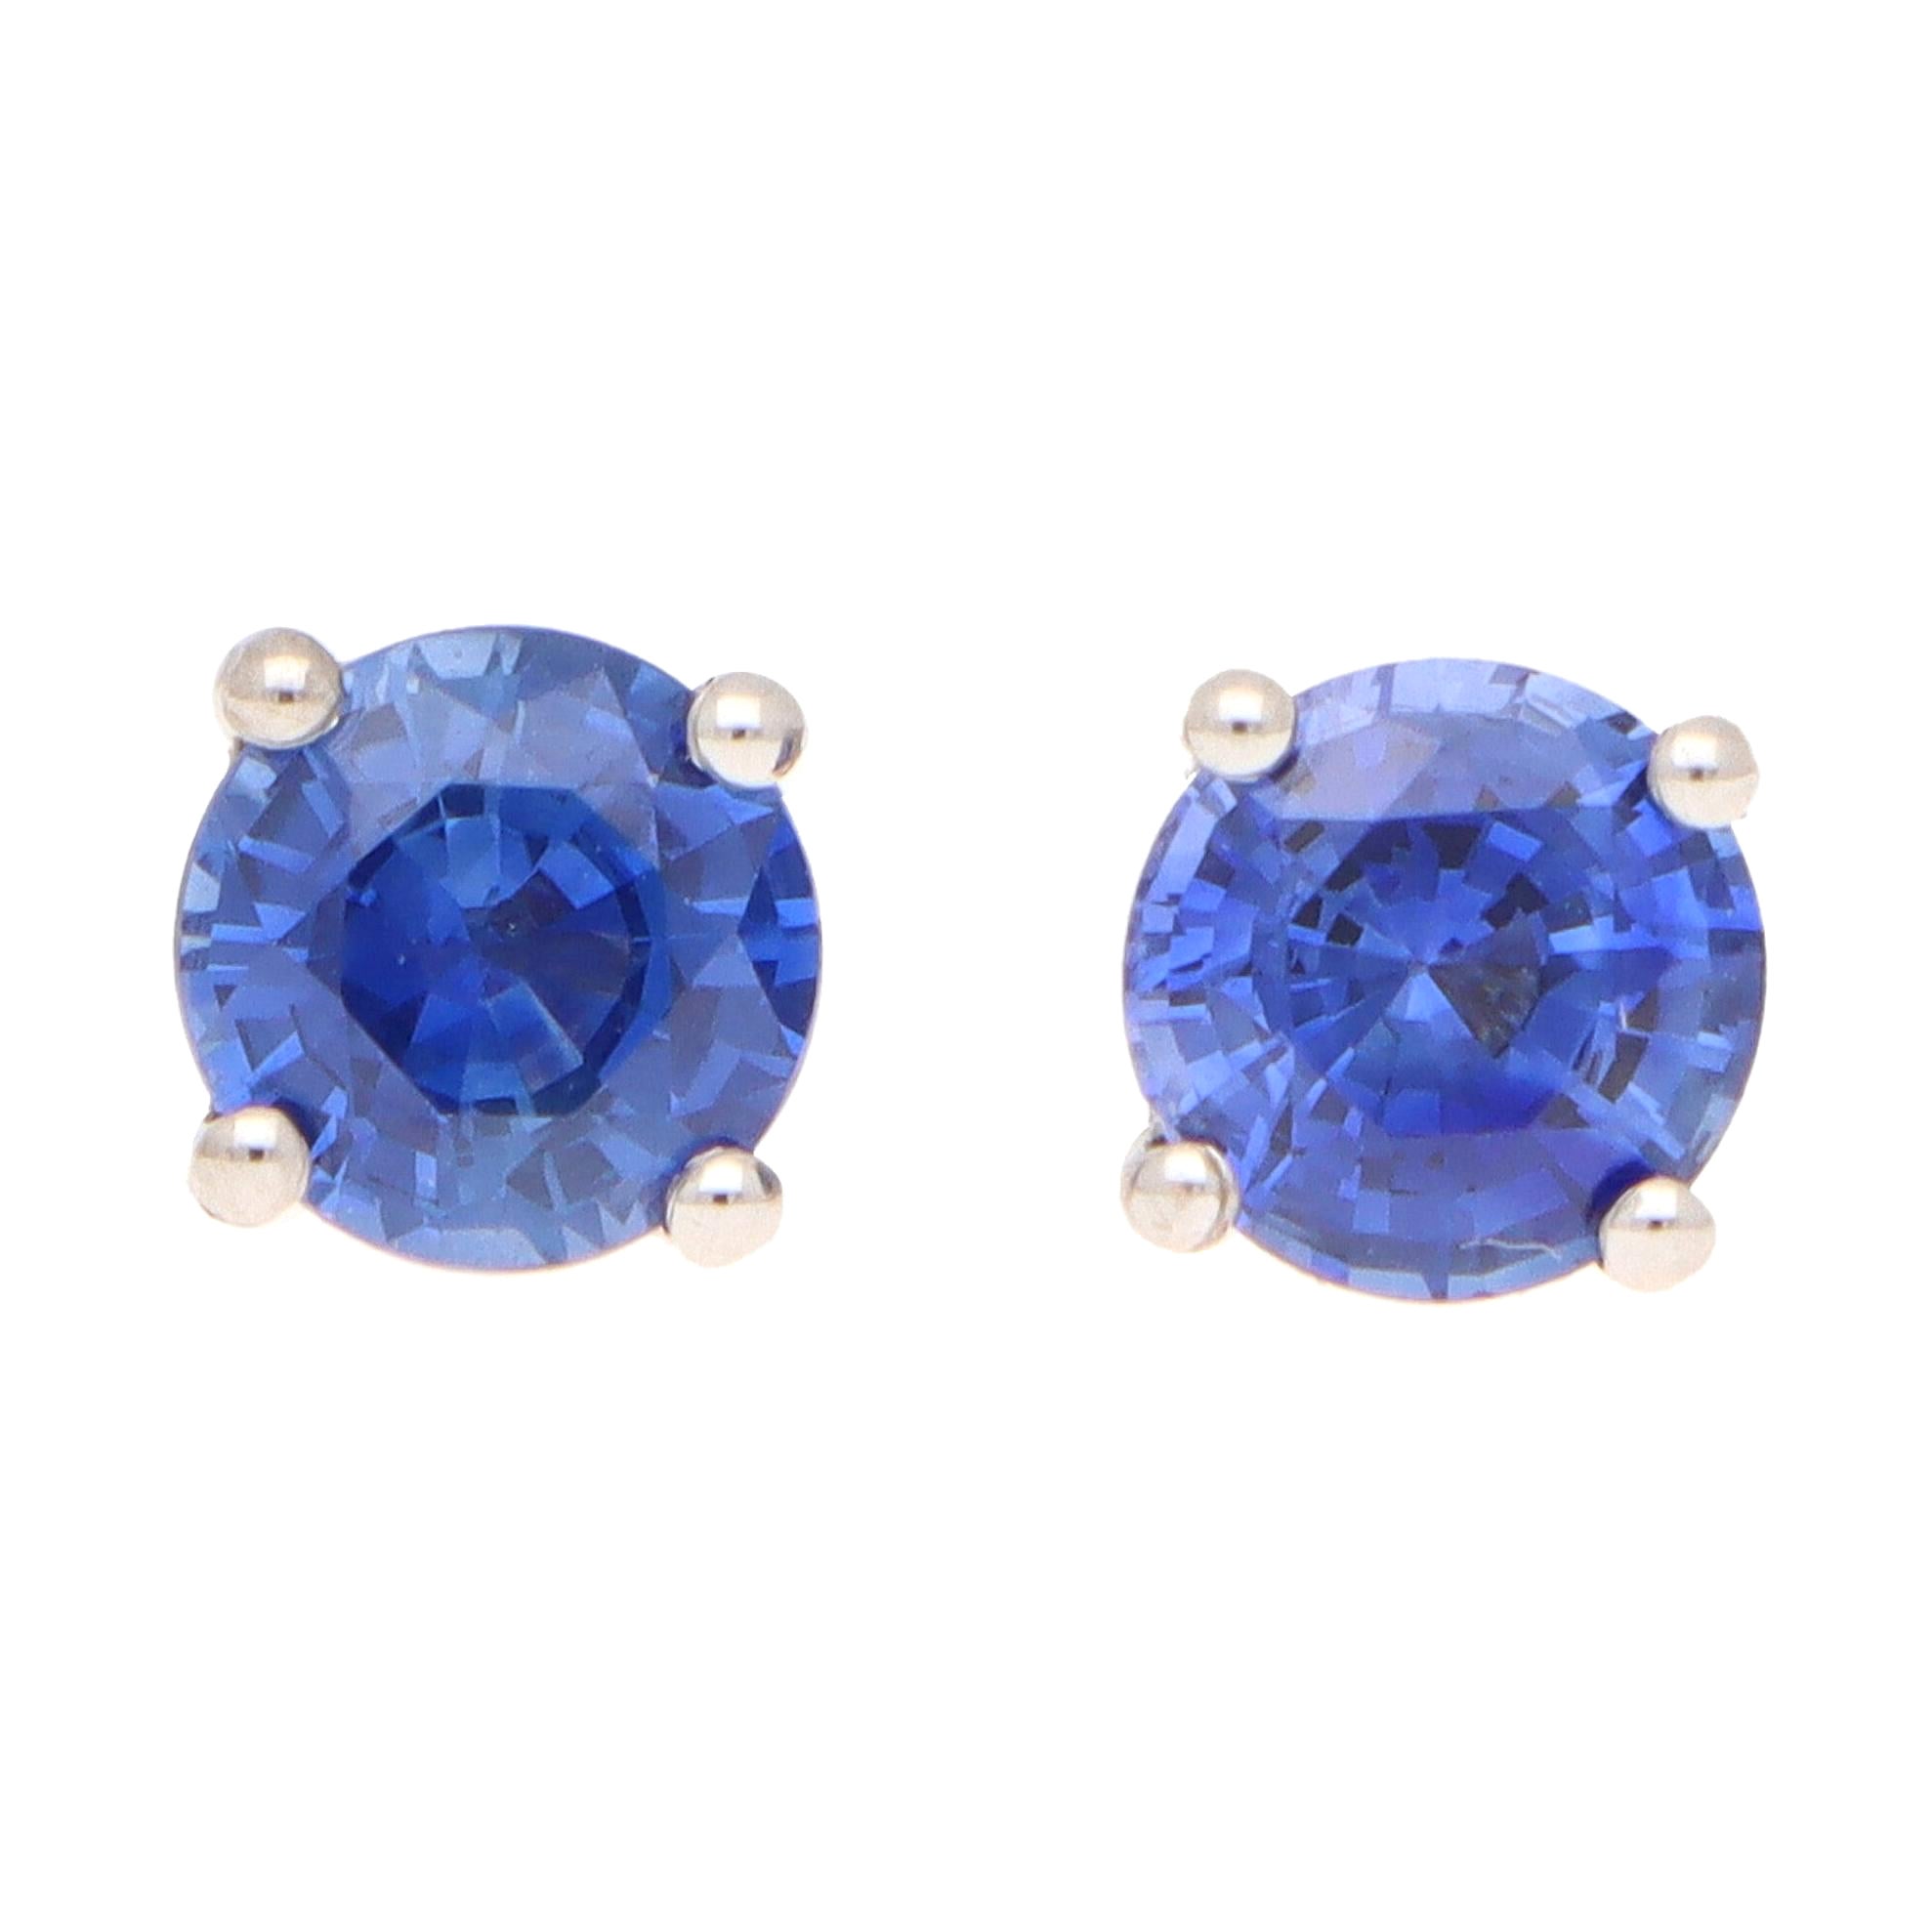 Round Cut 1.25ct Blue Sapphire Stud Earrings Set in 18k Yellow and White Gold